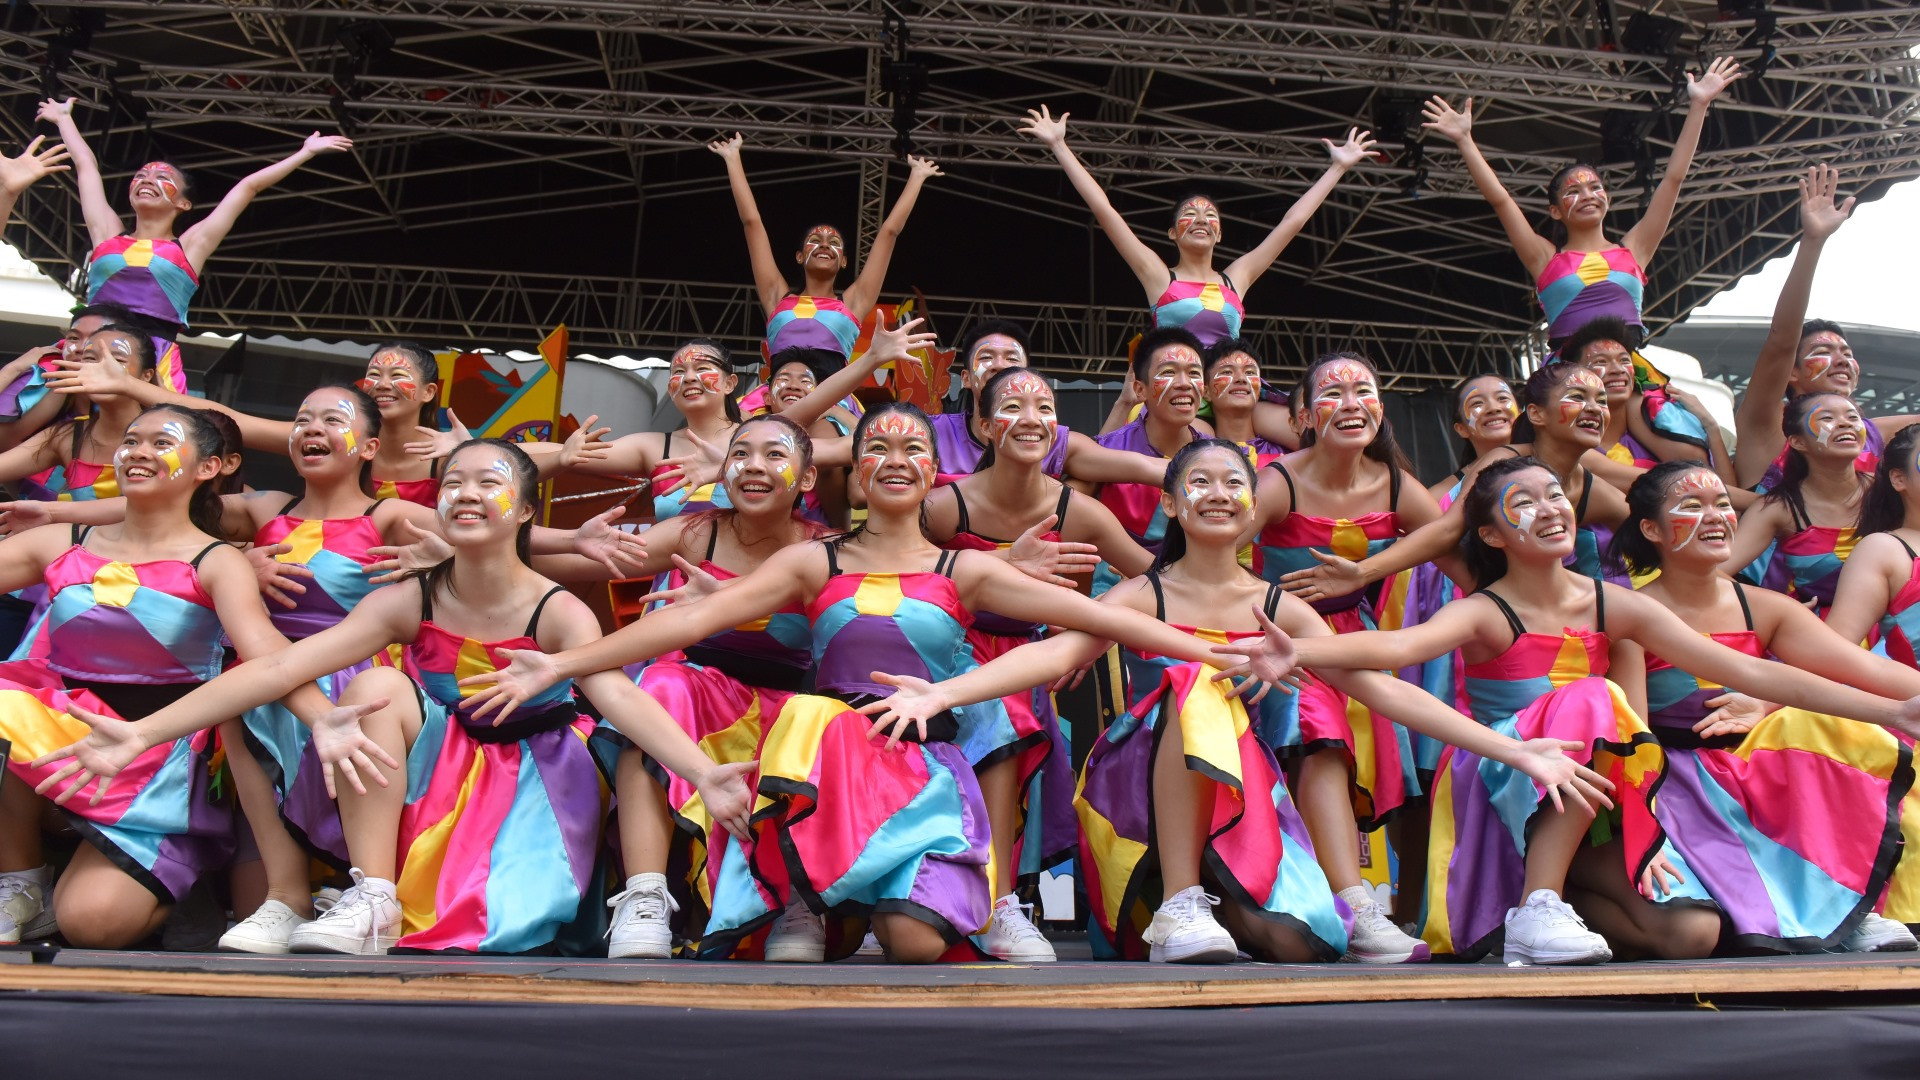 Students from Yong Loo Lin School of Medicine were among over 1,100 student performers this year who took to the stage in a burst of lively energy and vibrant colour.